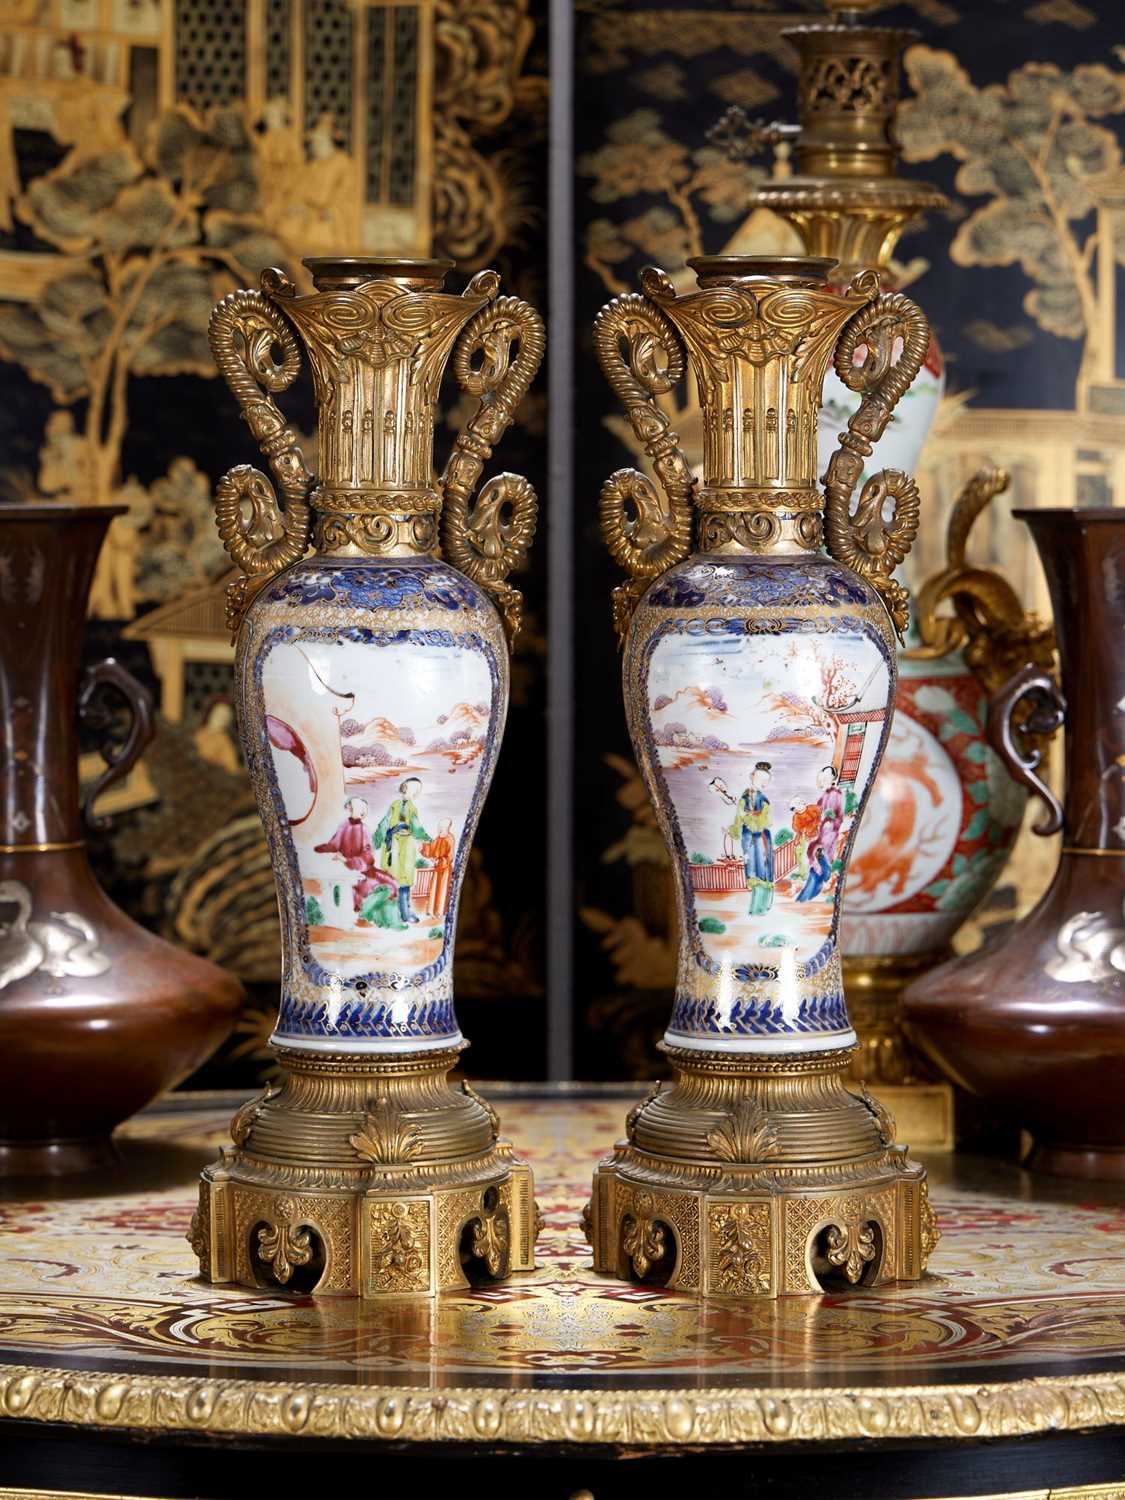 A FINE PAIR OF 18TH CENTURY CHINESE PORCELAIN AND GILT BRONZE MOUNTED VASES